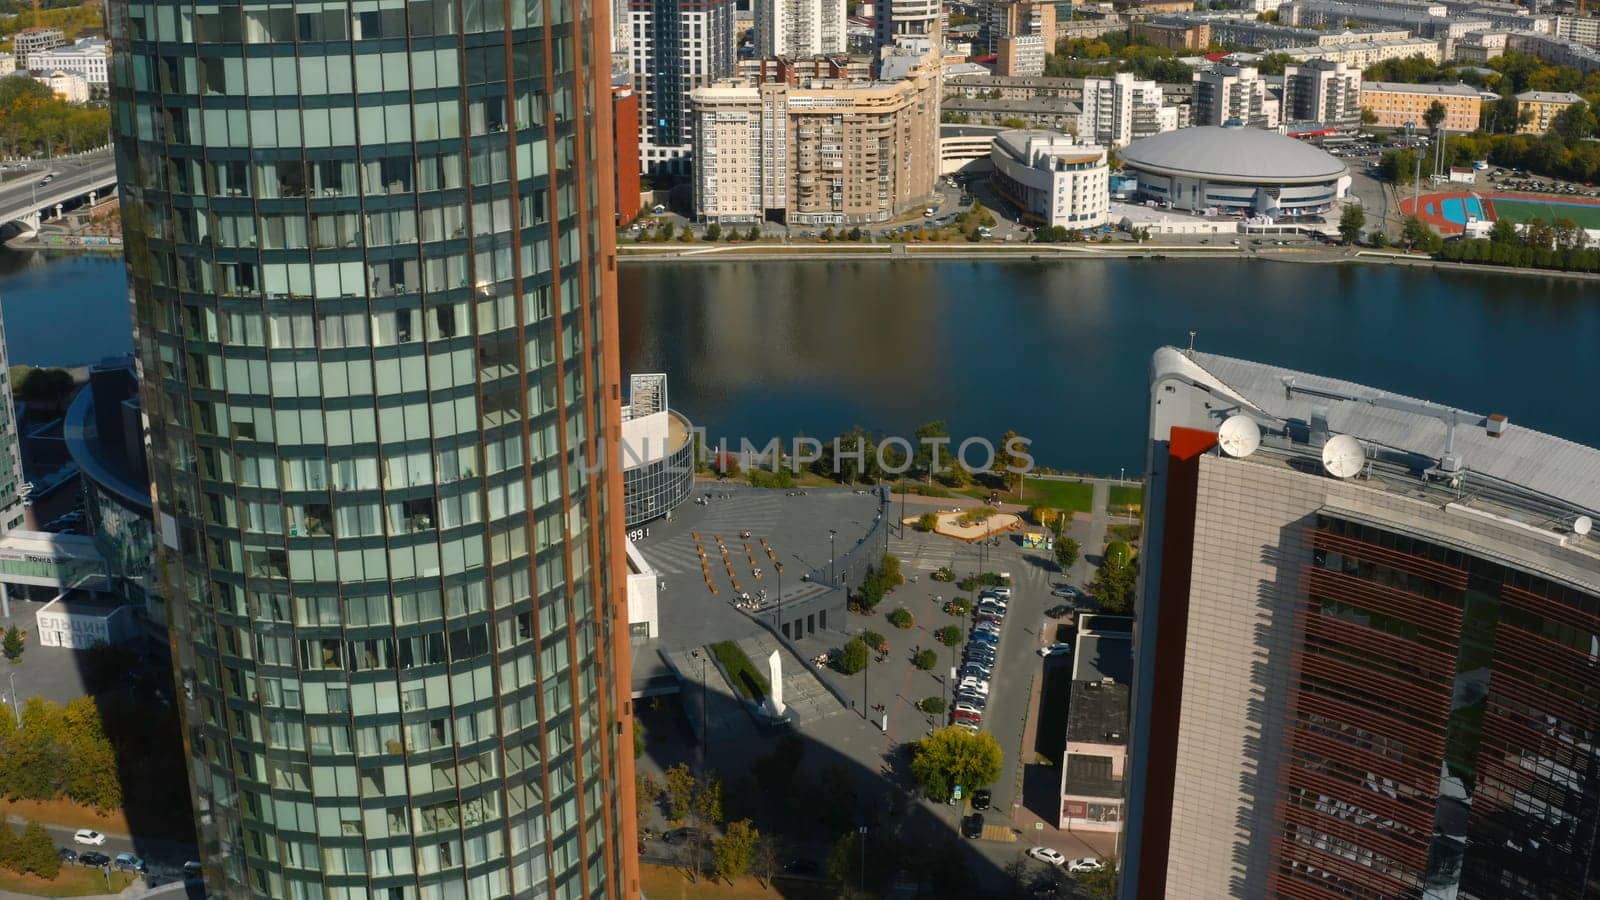 Beautiful architecture of modern high-rise buildings with offices. Stock footage. Business centers in high-rise buildings with glass facade in city center. Top view of beautiful architecture of modern city on sunny summer day.